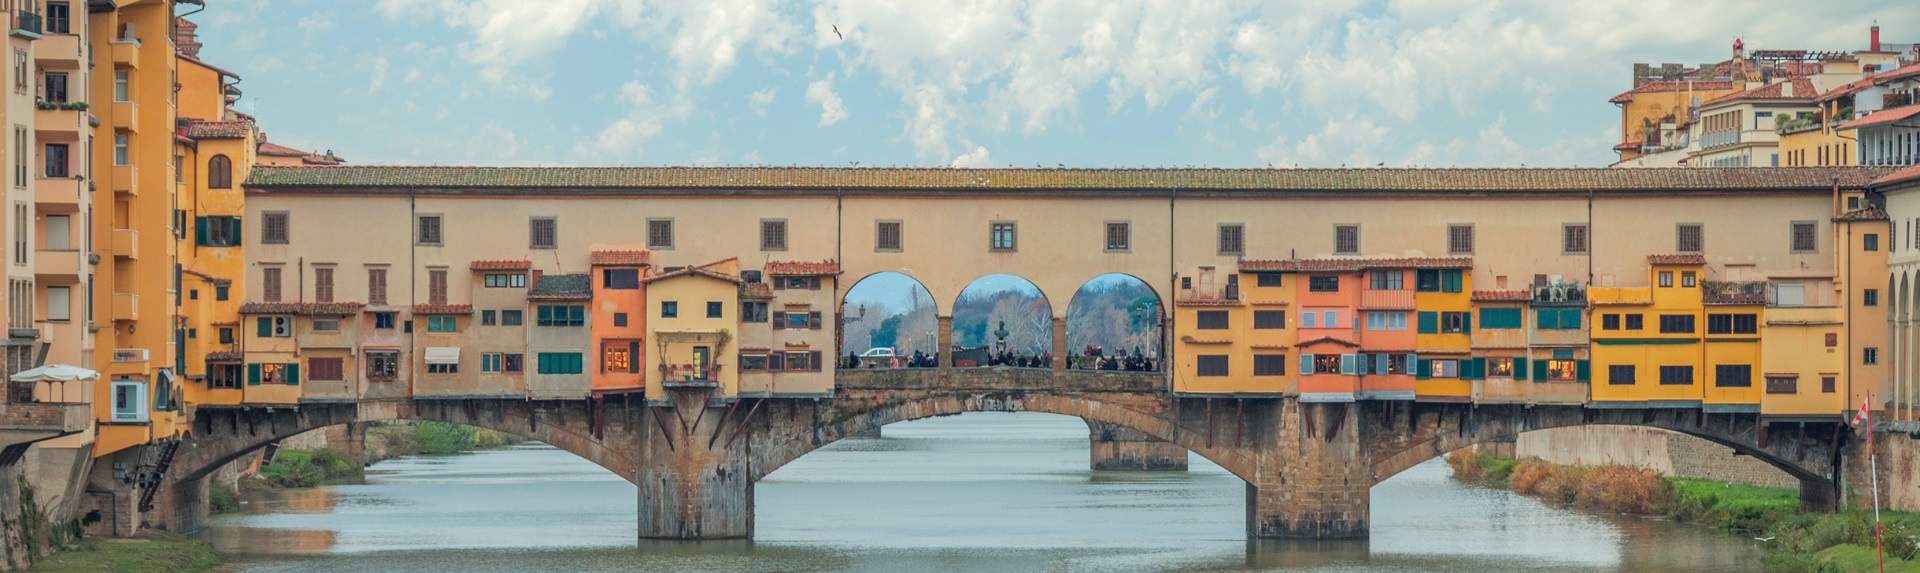 Why is Ponte Vecchio in Florence so famous?